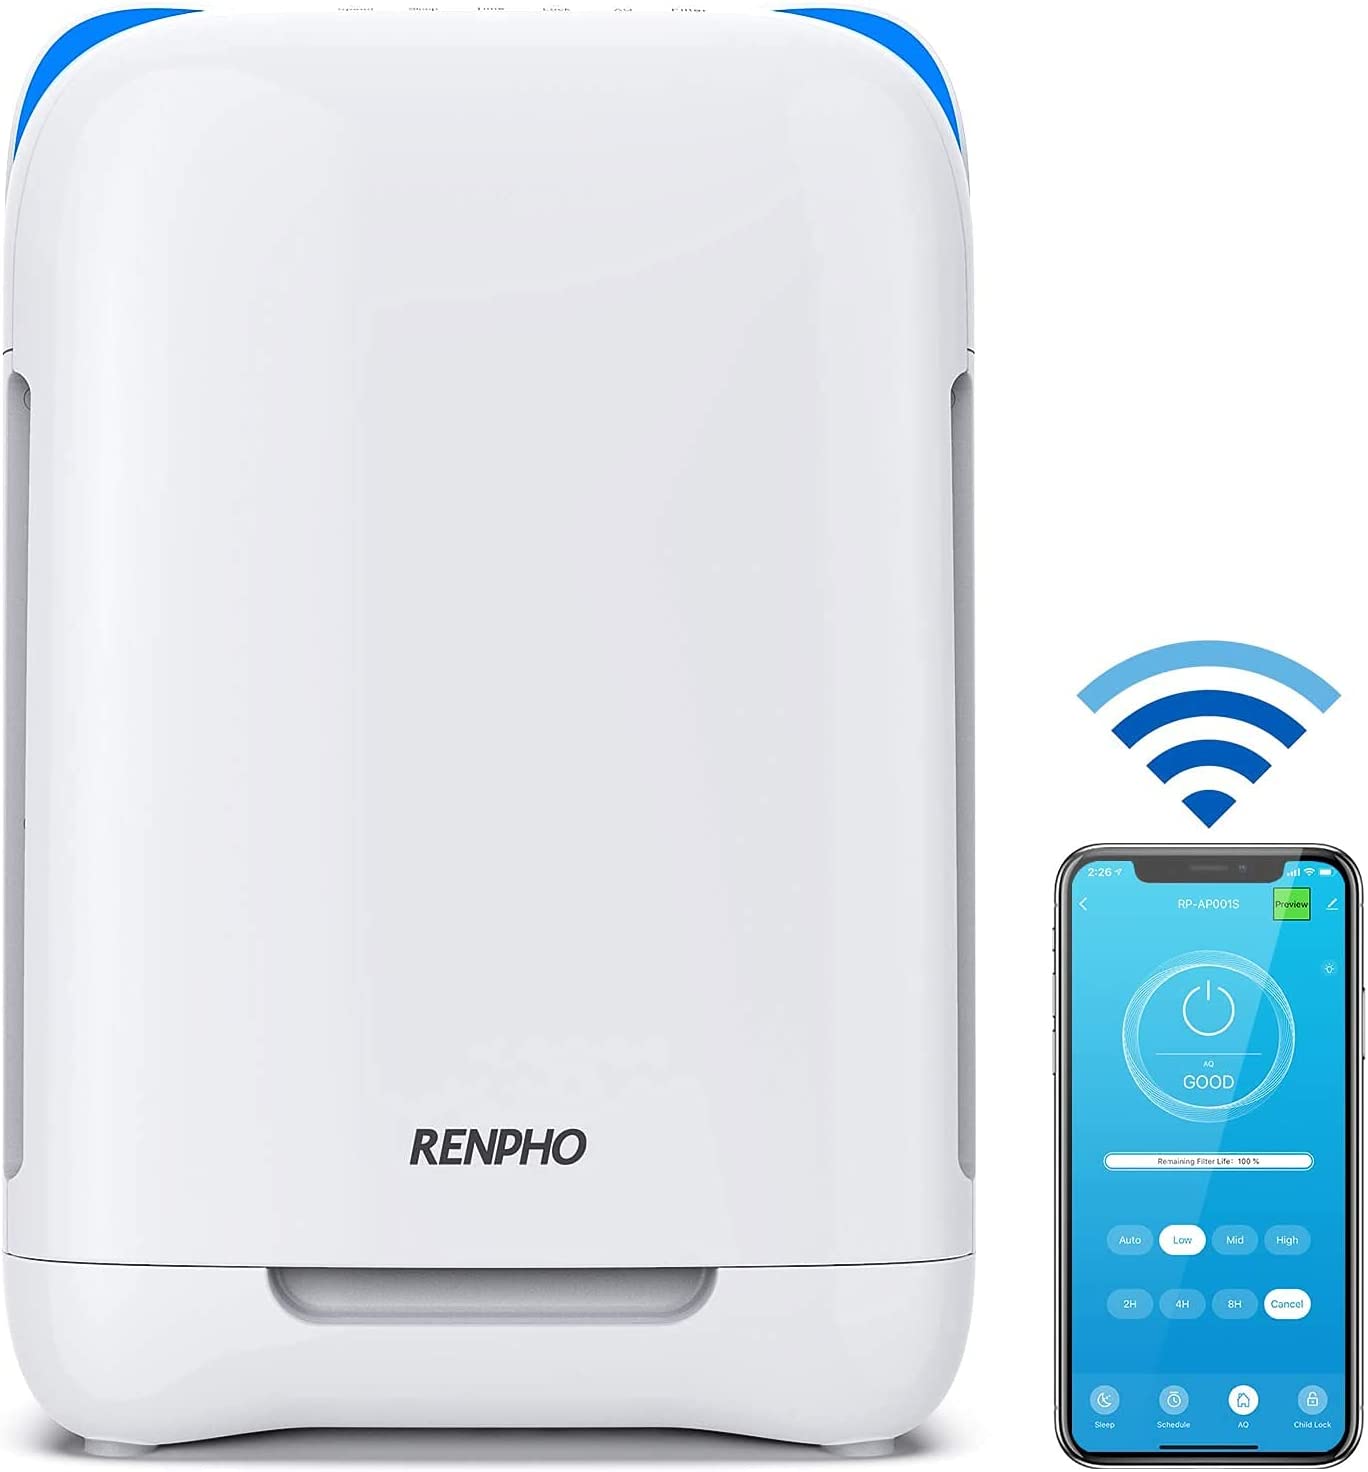  7. RENPHO Smart Air Purifier for Home and Bedroom with Smart Wi-Fi 